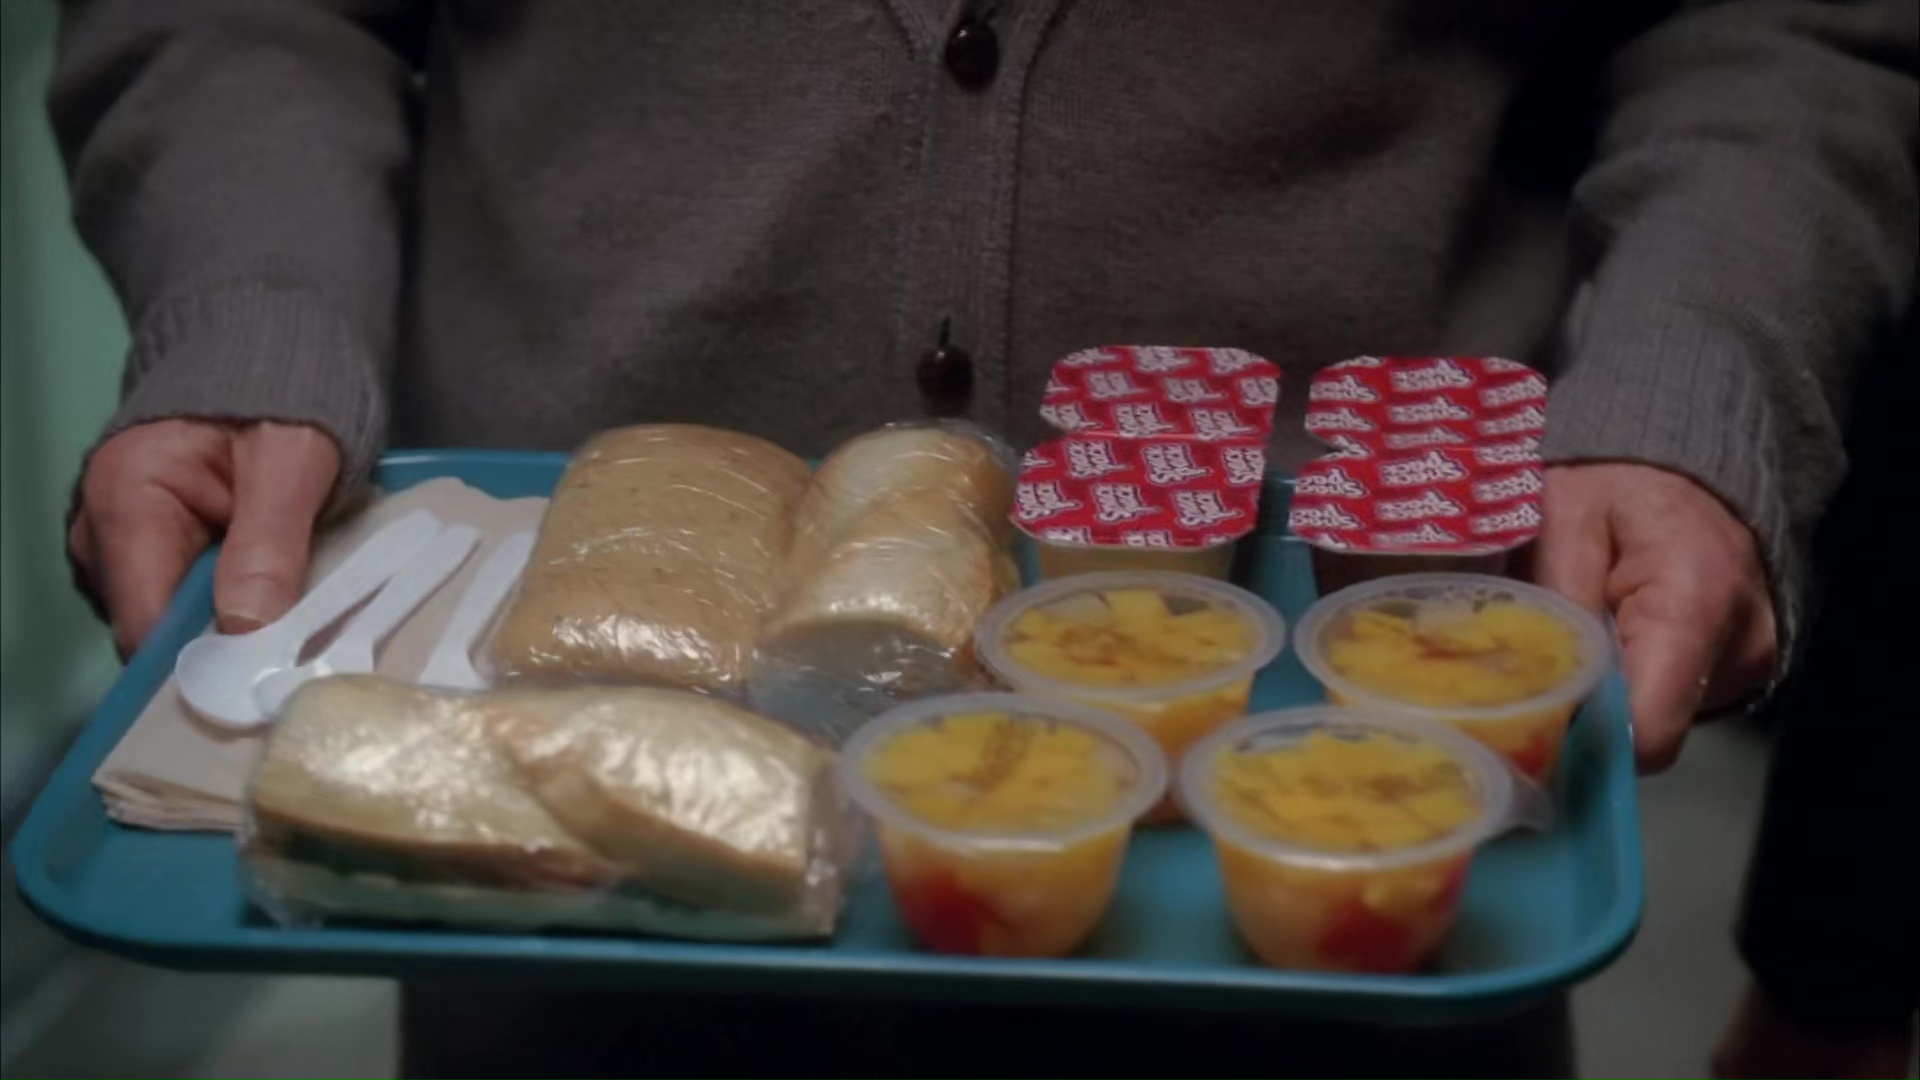 Walter's Food: Sandwiches, fruit cups, and puddings